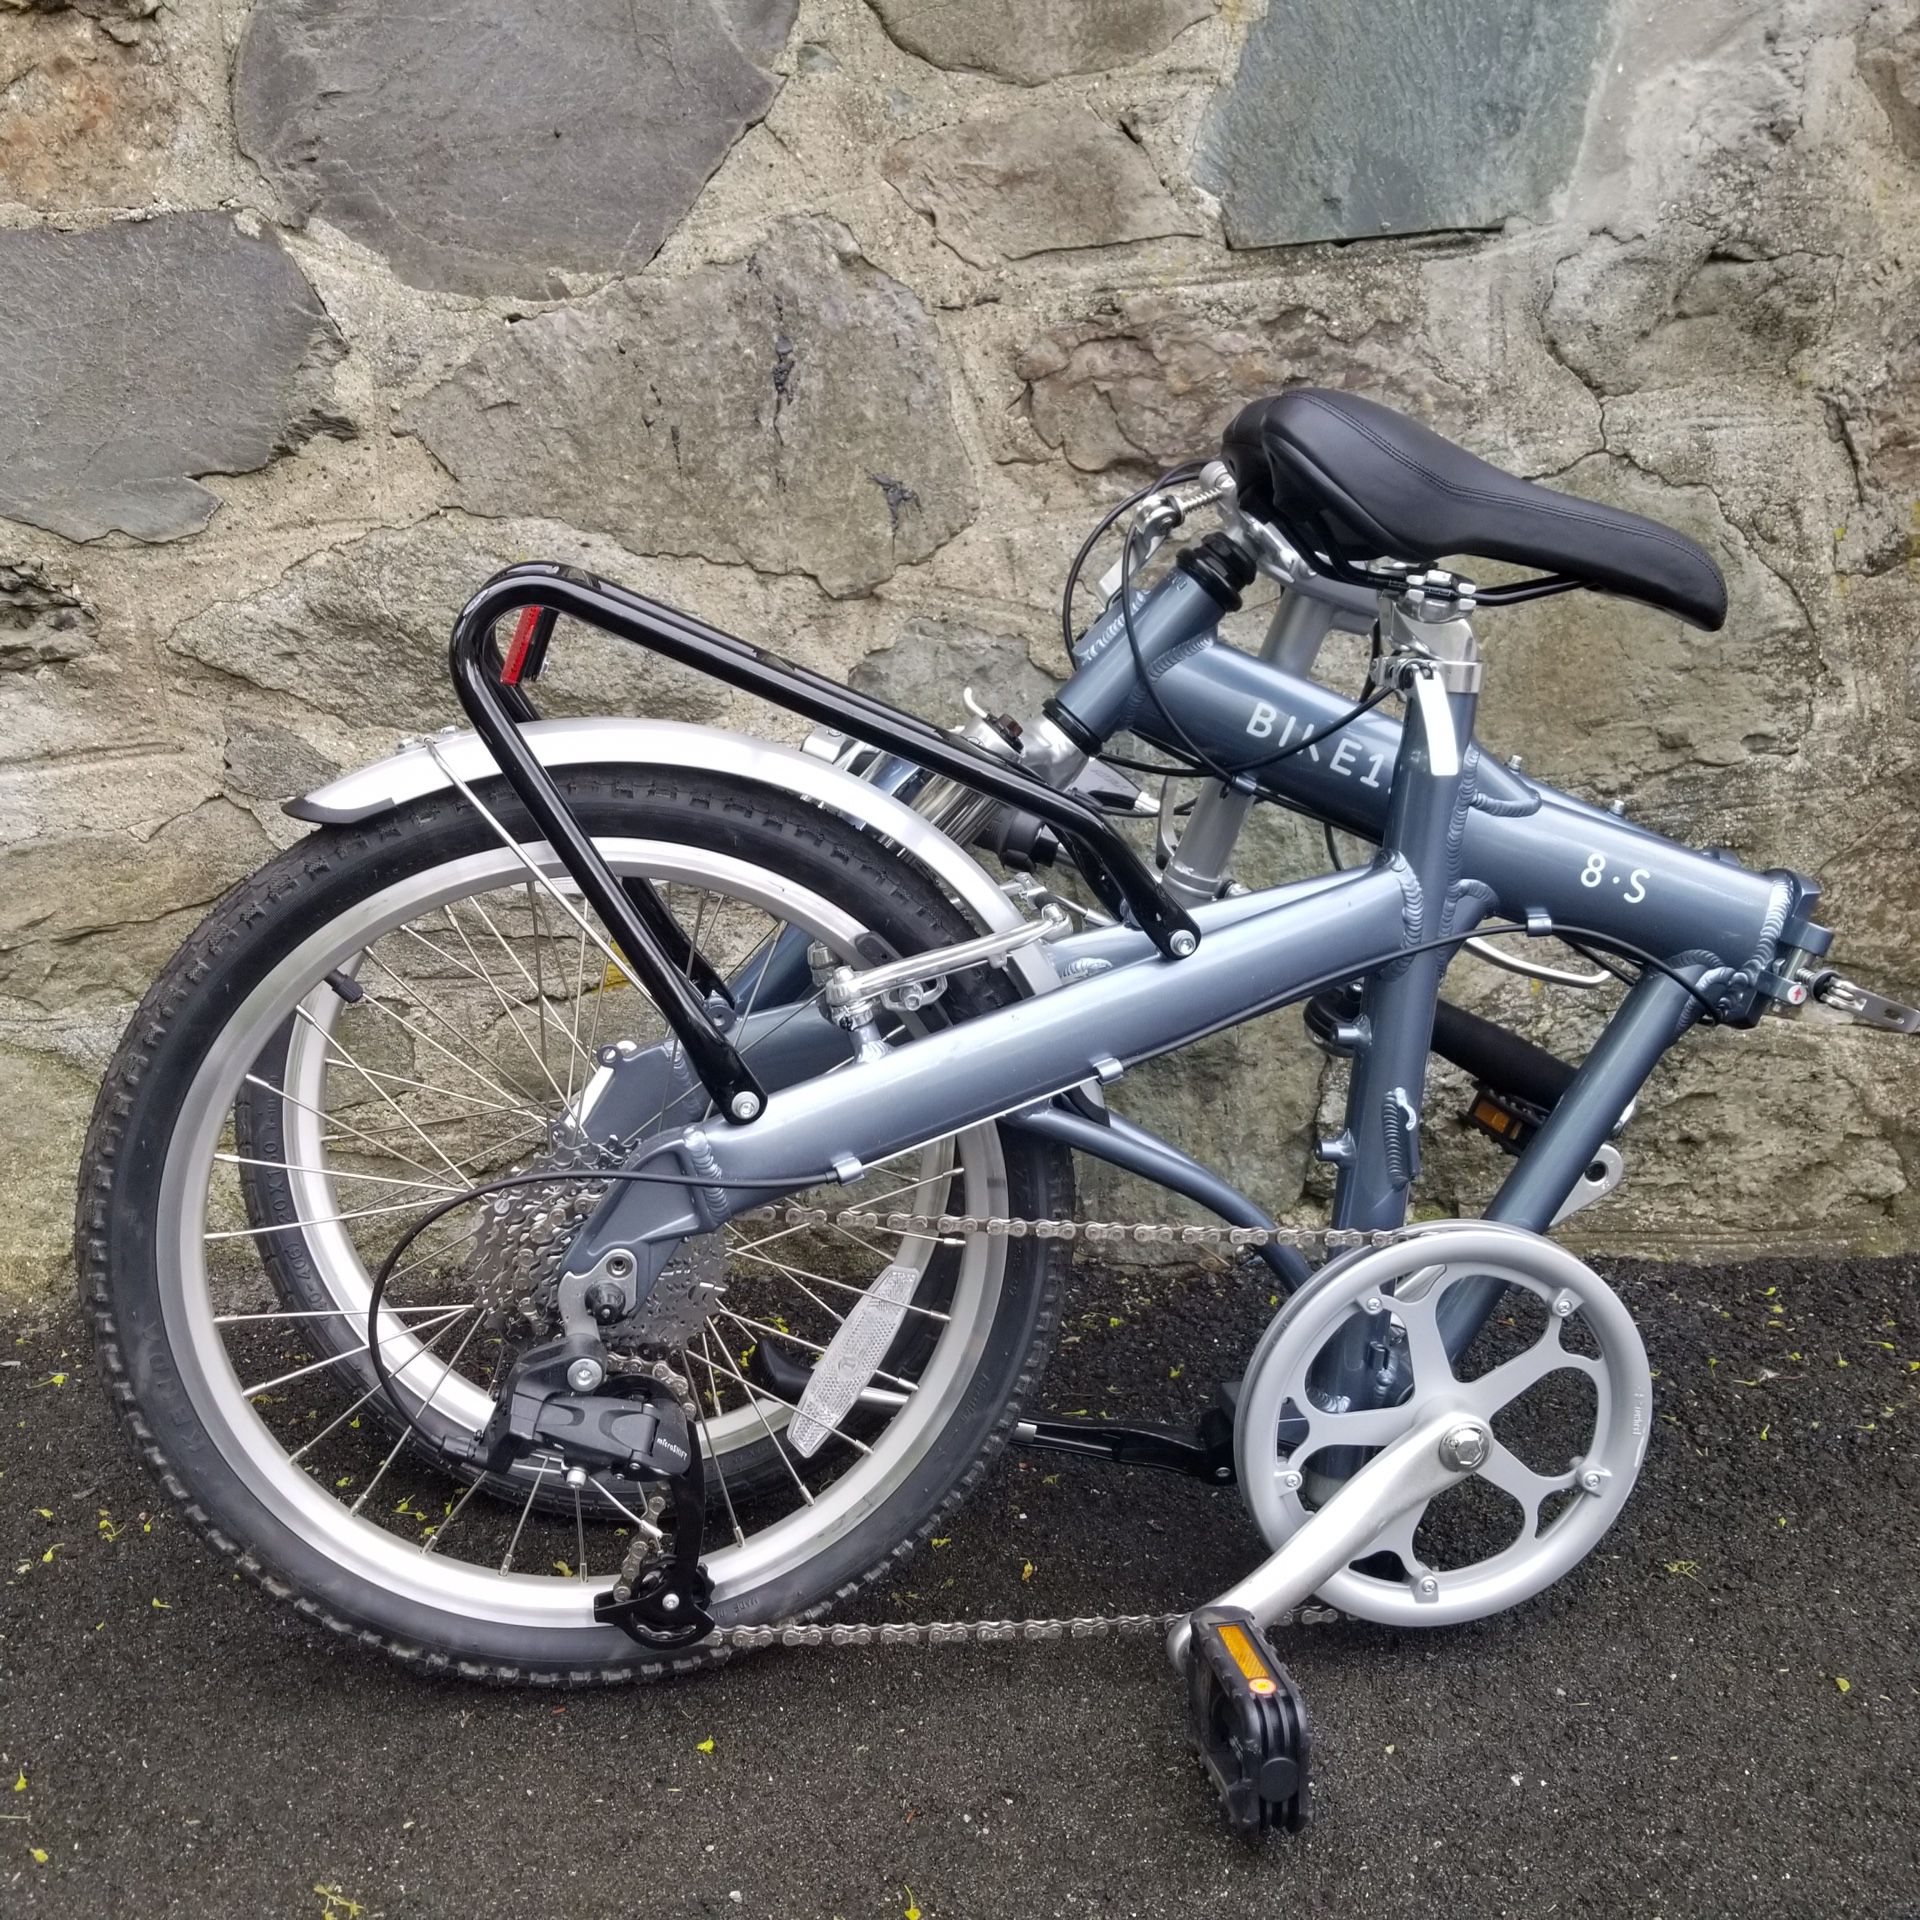 Stonewall Ebikes - Custom Built Electric Bicycles—> Extremely light, compact, comfortable, fast & Efficient Folding Bicycle- Can be Electrified!!!!!!